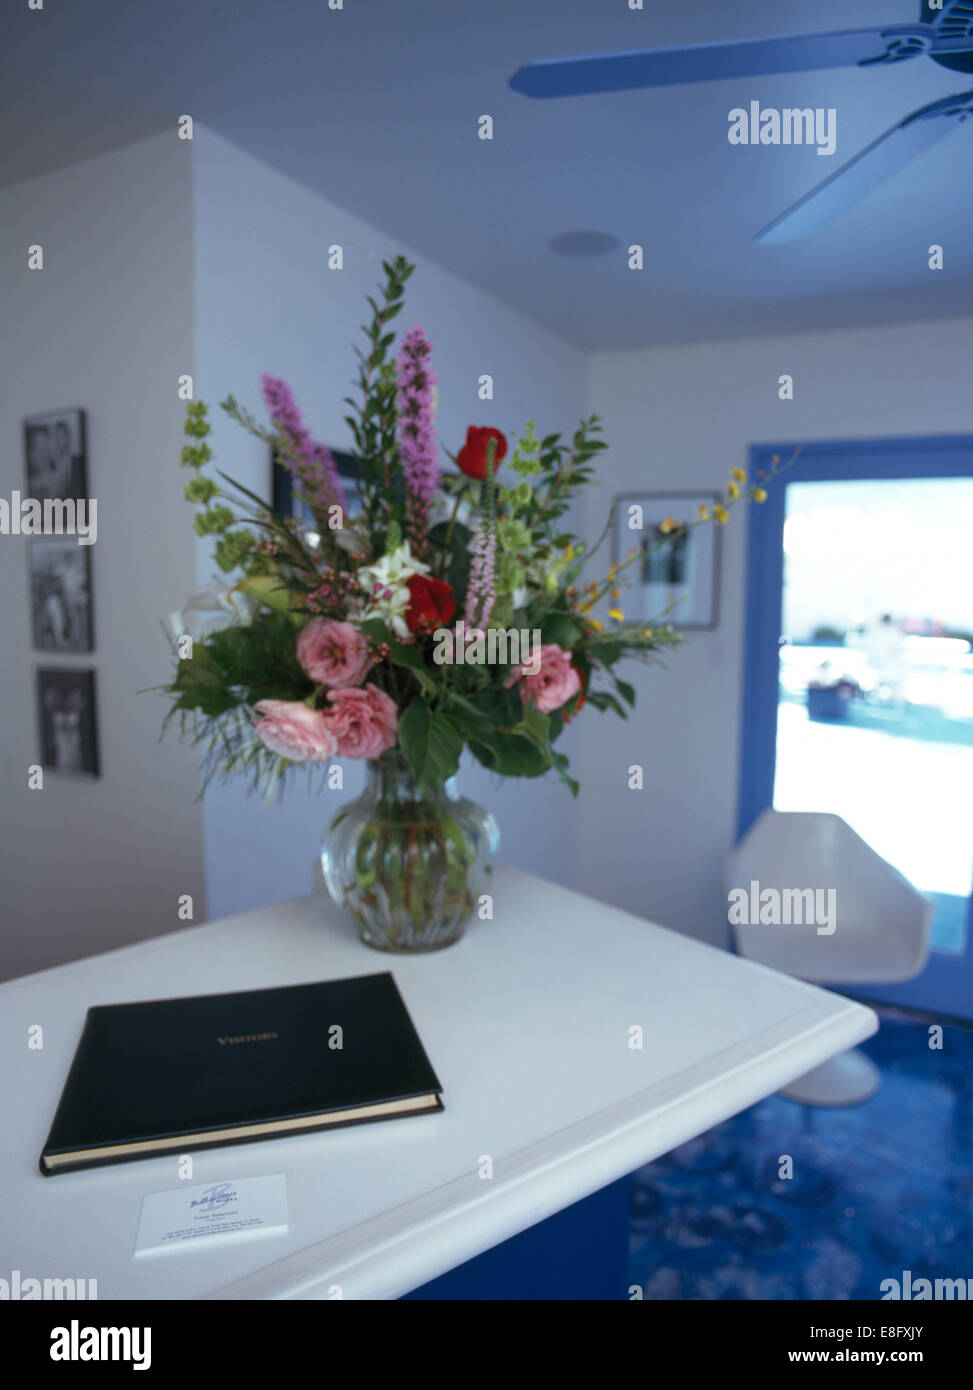 Vase Of Summer Flowers And Visitor S Book On Desk In Modern Hotel